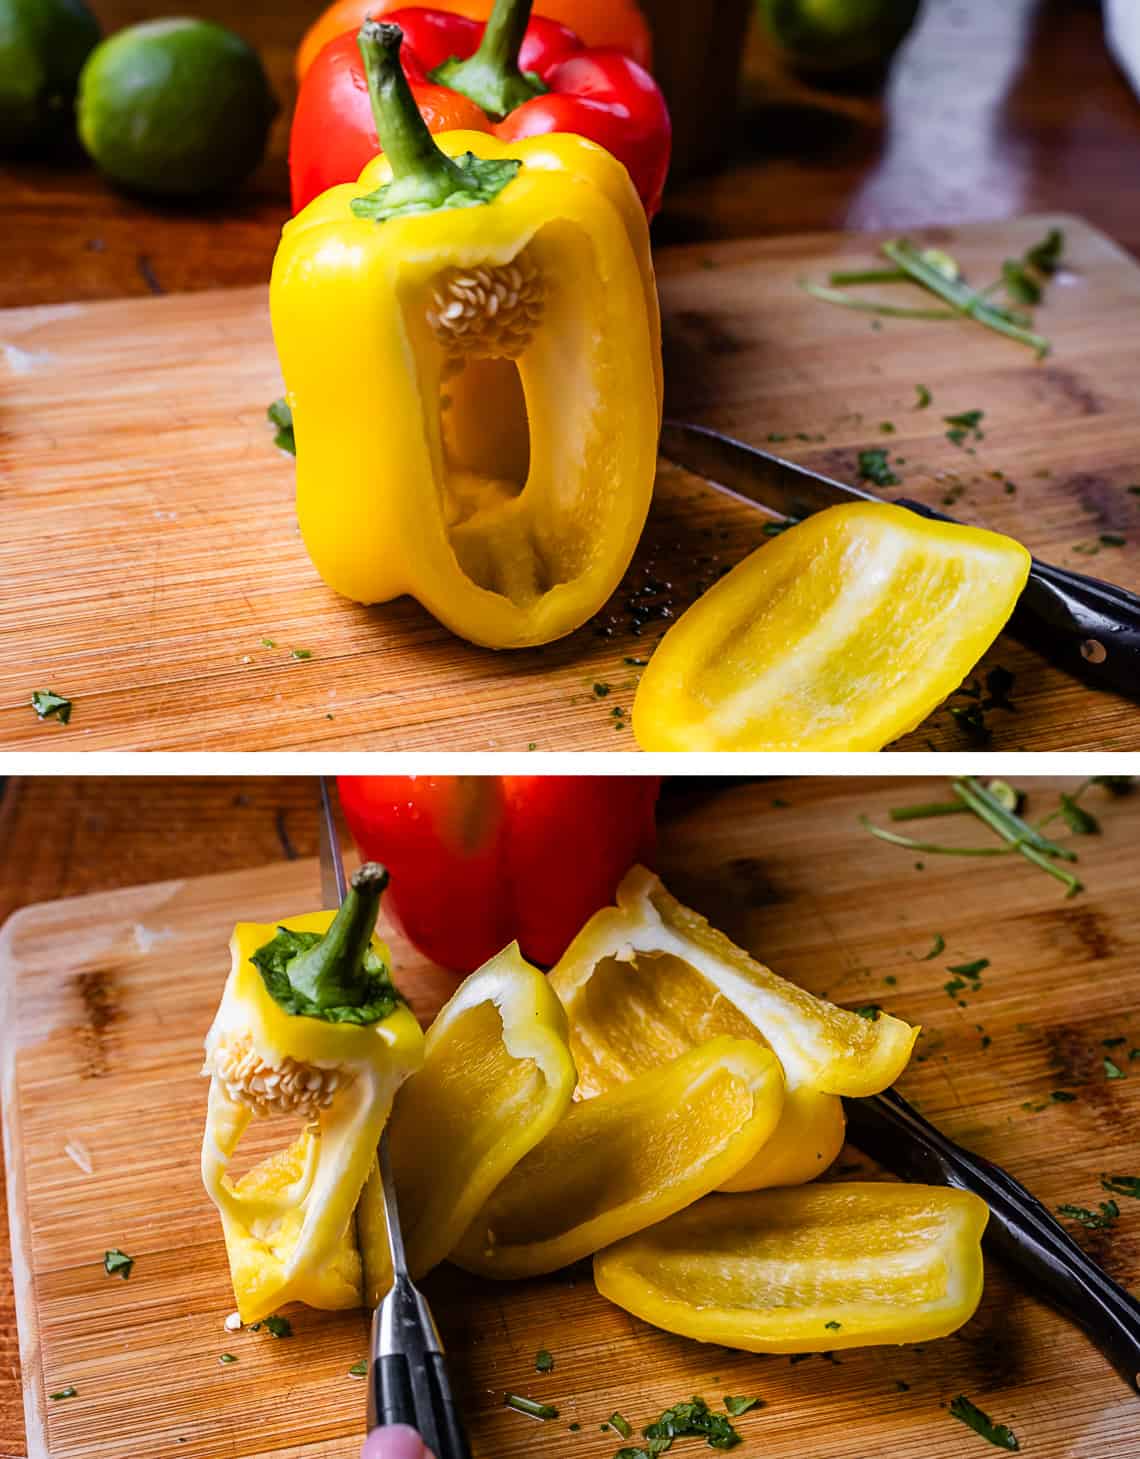 top showing how to cut bell pepper; bottom all sides cut off the center of the bell pepper.